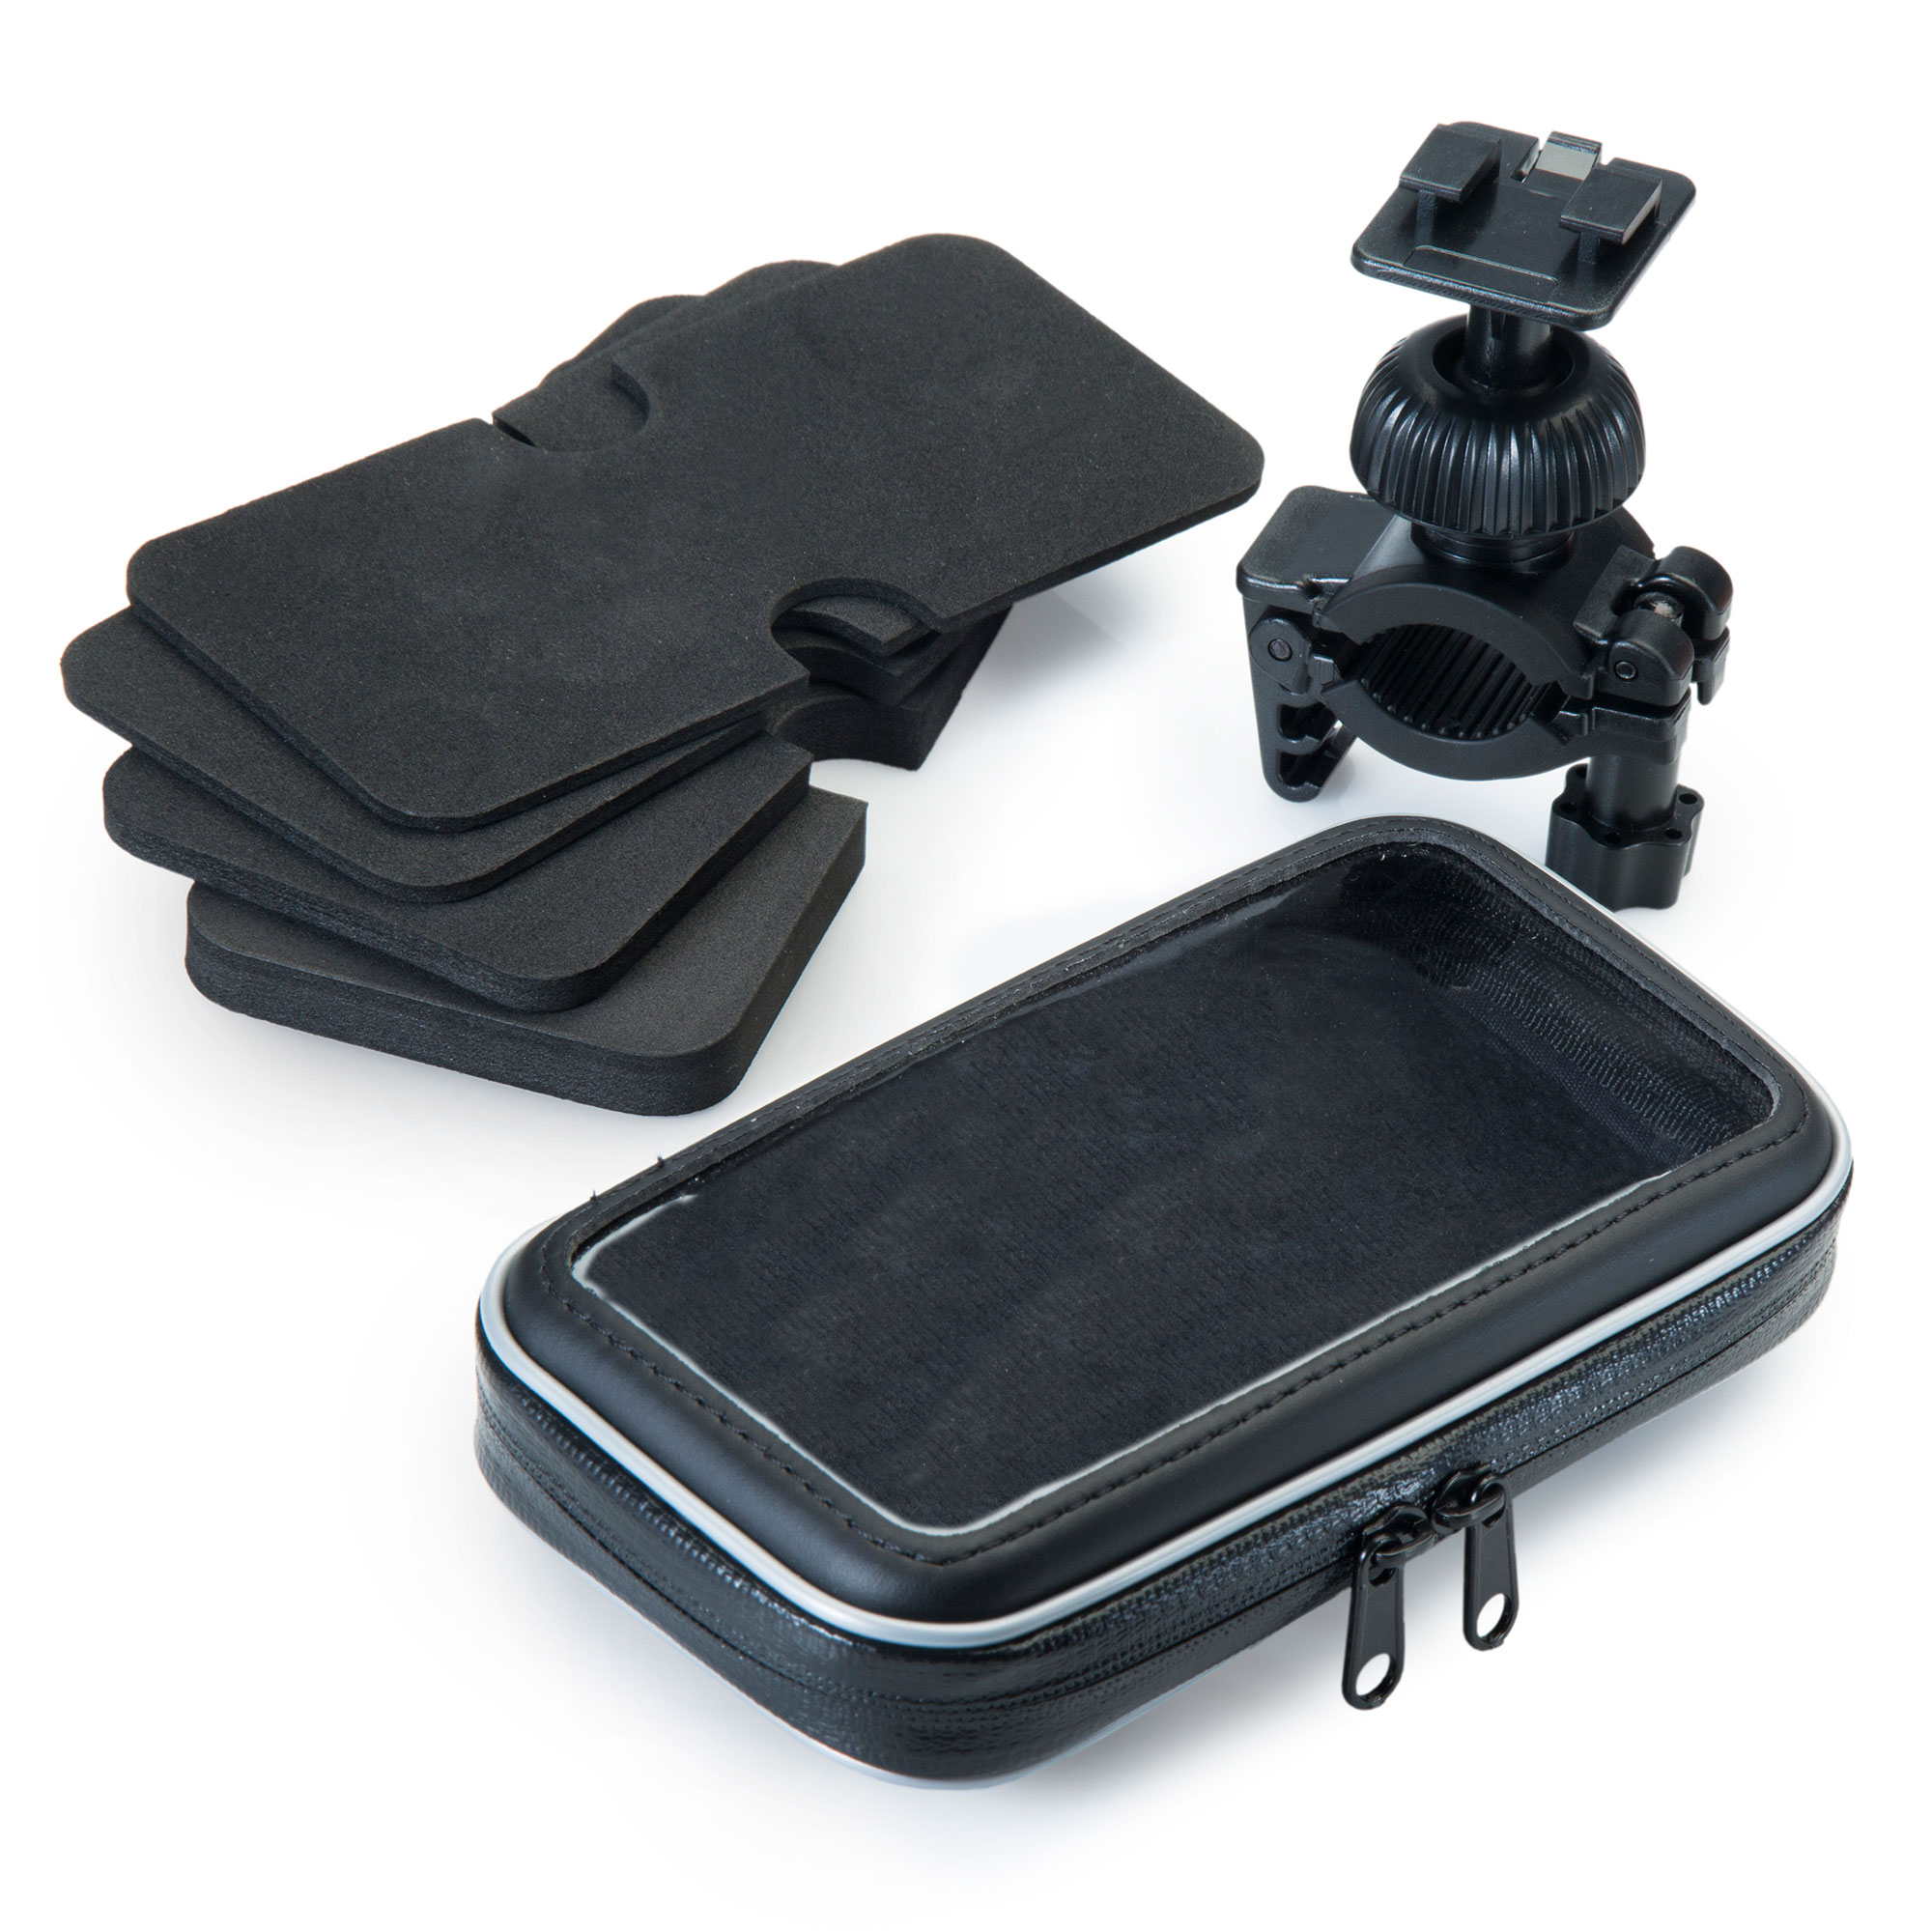 Heavy Duty Weather Resistant Bicycle / Motorcycle Handlebar Mount Holder Designed for the HTC One mini